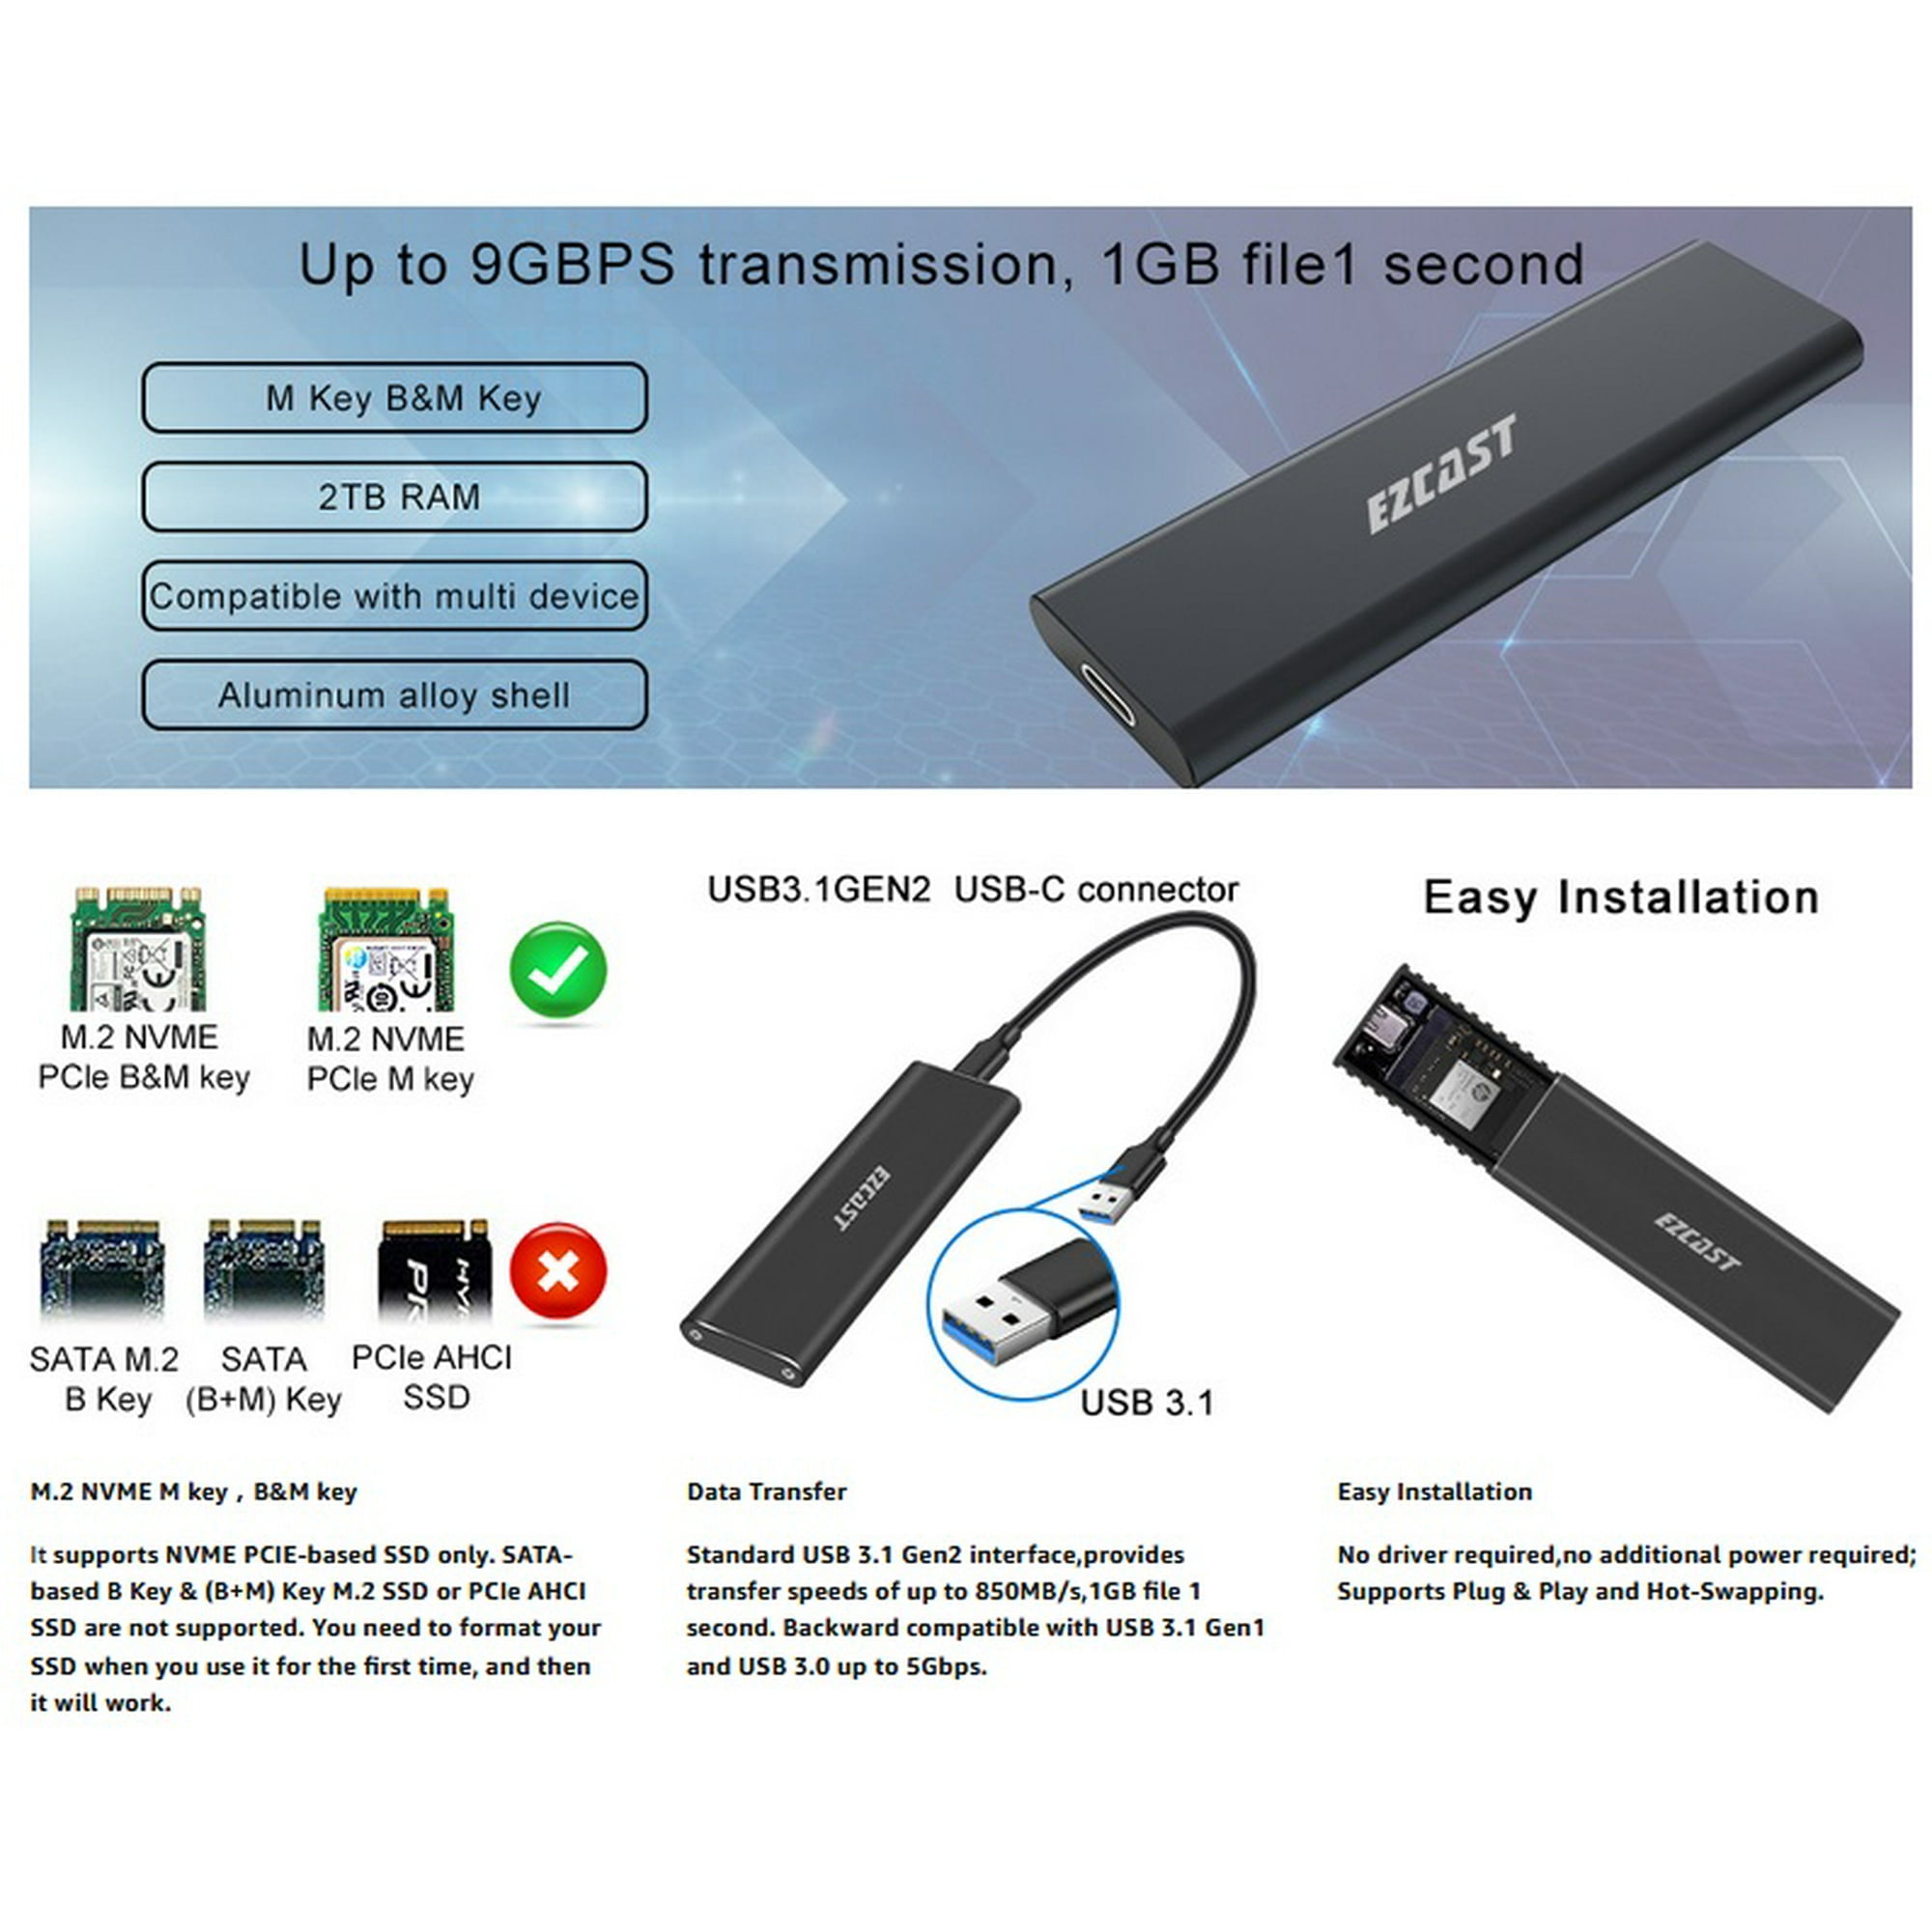 M.2 NVME SSD Enclosure Adapter USB 3.1 Gen to NVME PCI-e Solid State Drive External Enclosure USB C Support UASP for NVME SSD 2230/2242/2260/2280 | Walmart Canada